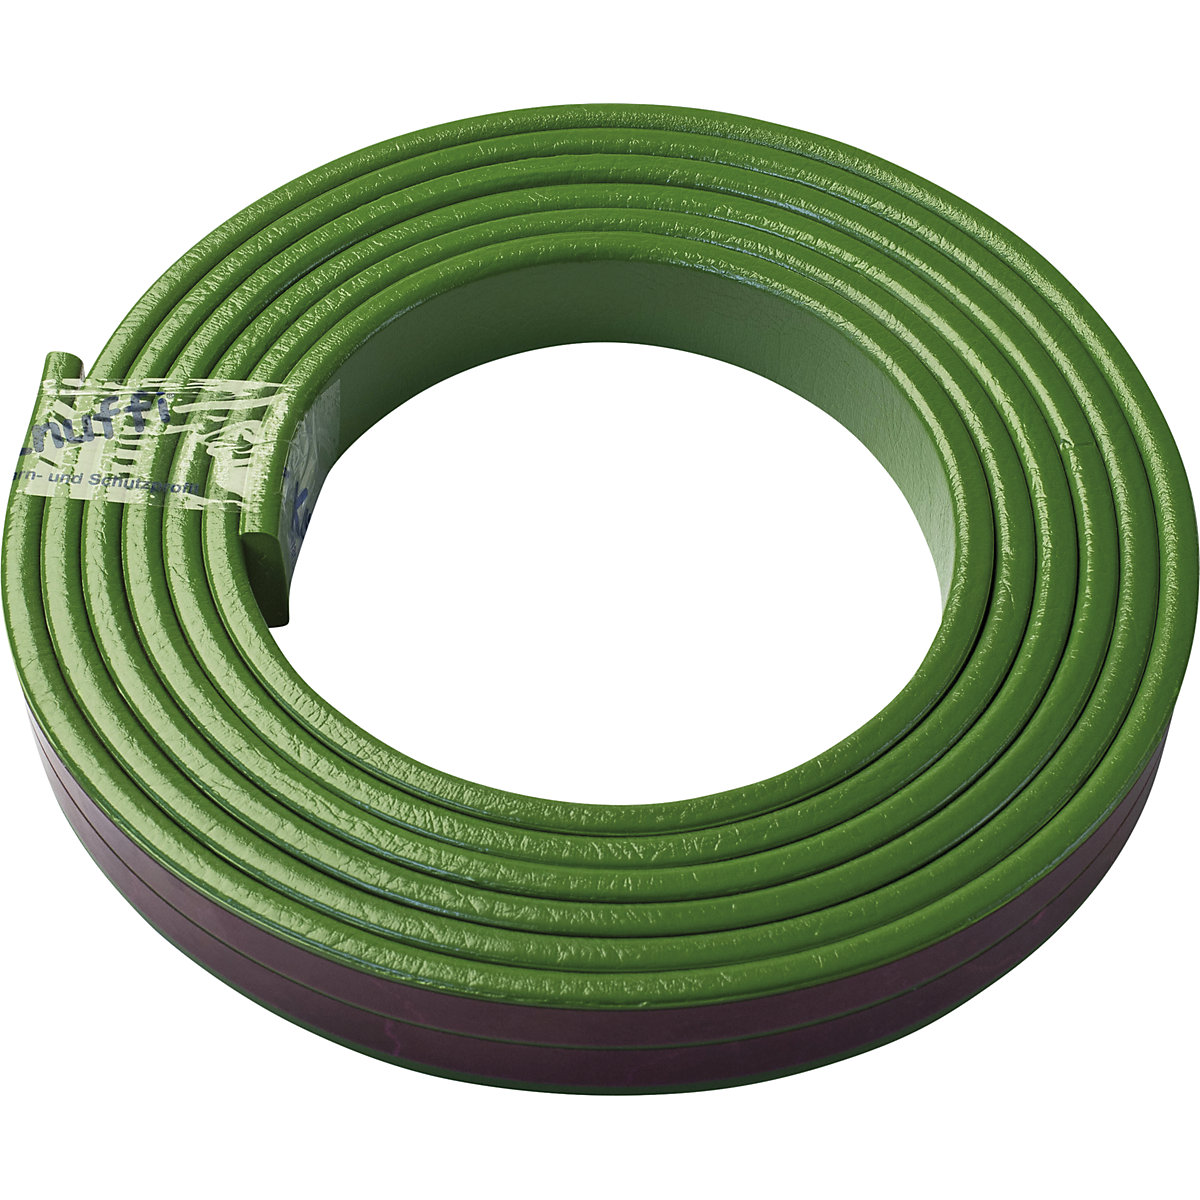 Knuffi® surface protection – SHG, type F, 1 x 5 m roll, green-29